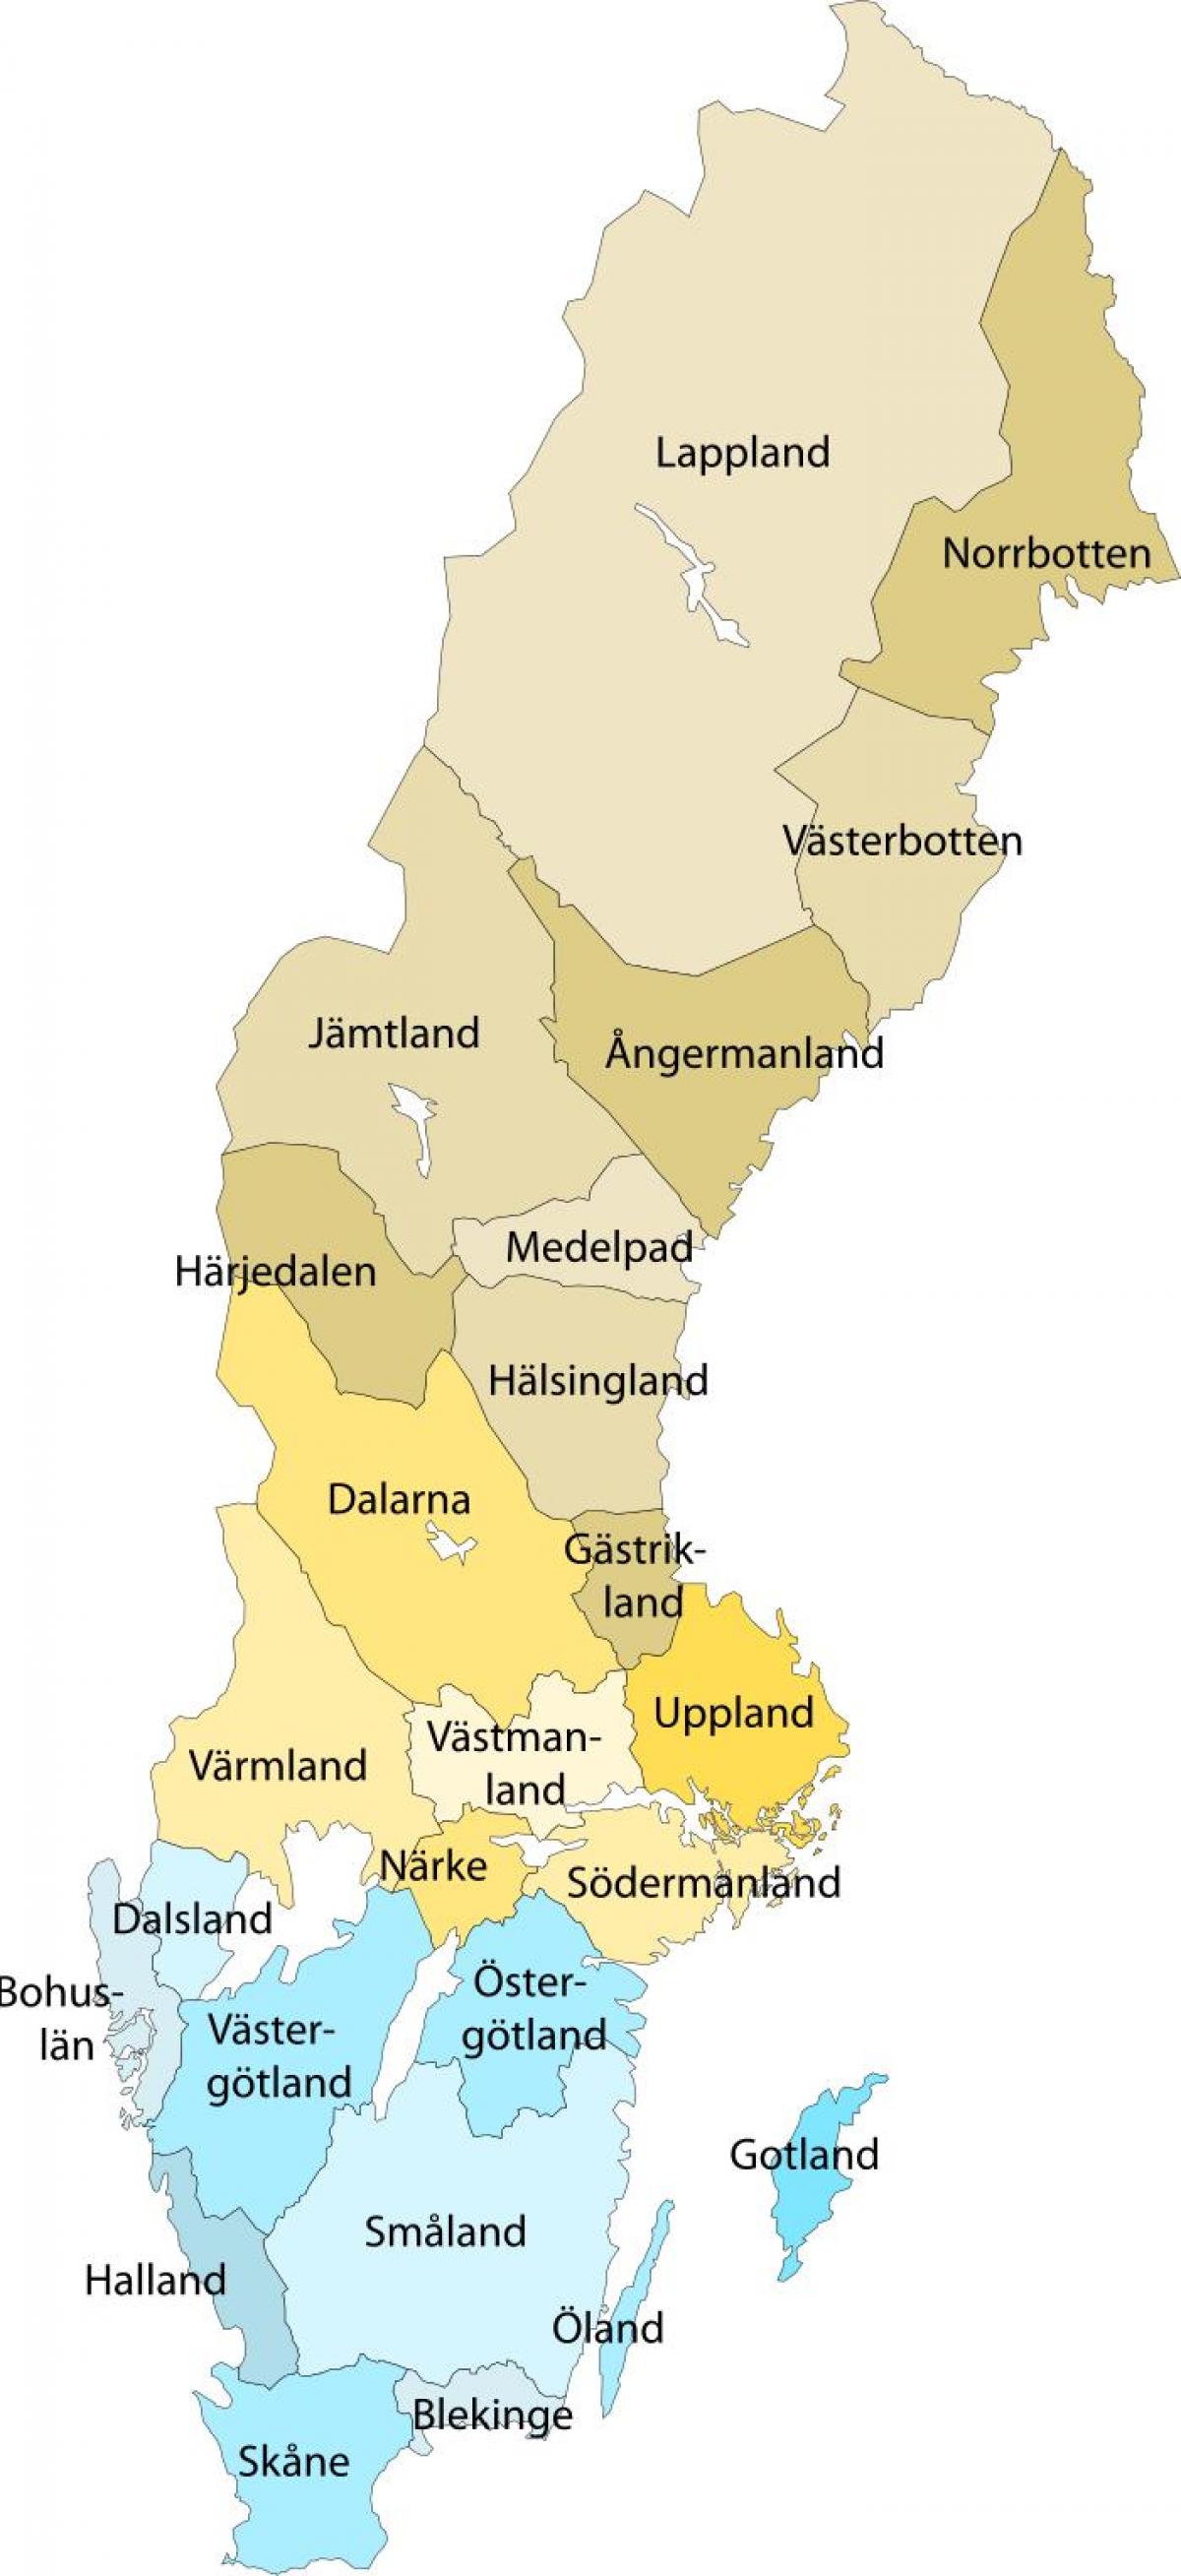 Lapland Sweden map - Map of Lapland Sweden (Northern Europe - Europe)